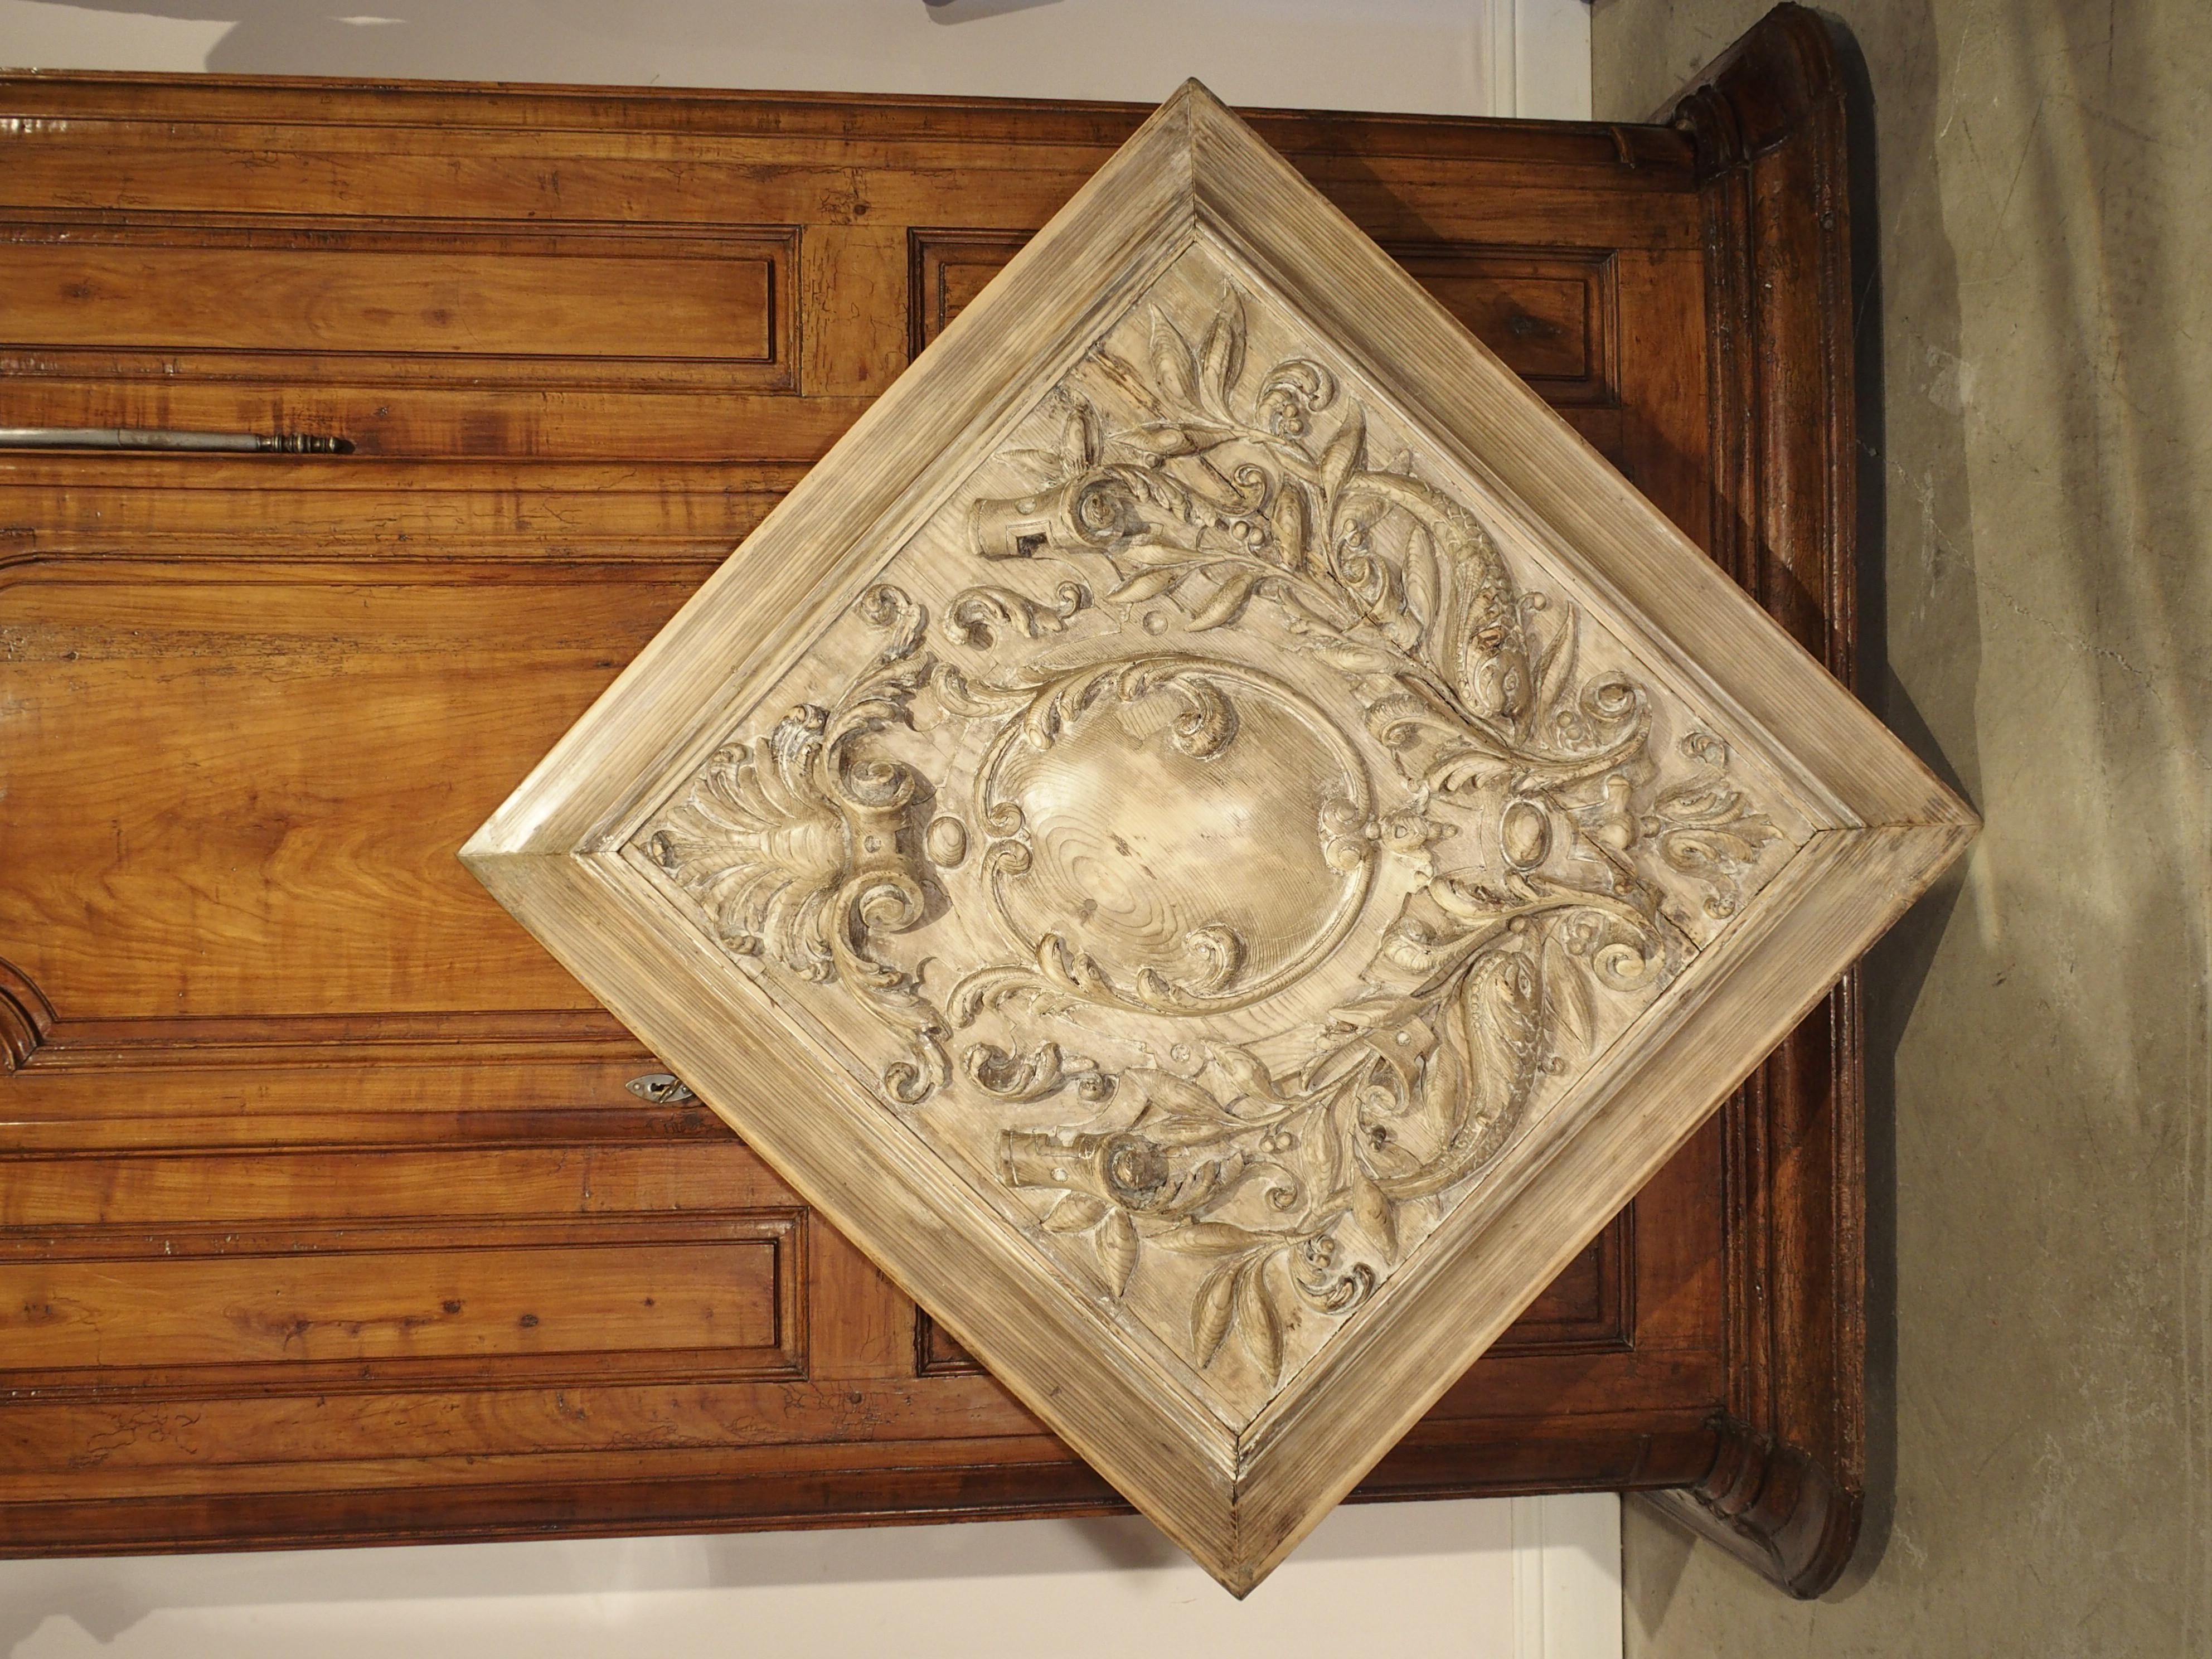 This important antique pine plaque would make an elegant addition over a mantel or stone fireplace. Square in shape and hand carved in France, circa 1860, the large panel features a shell motif at the pediment with a central crest flanked by a pair